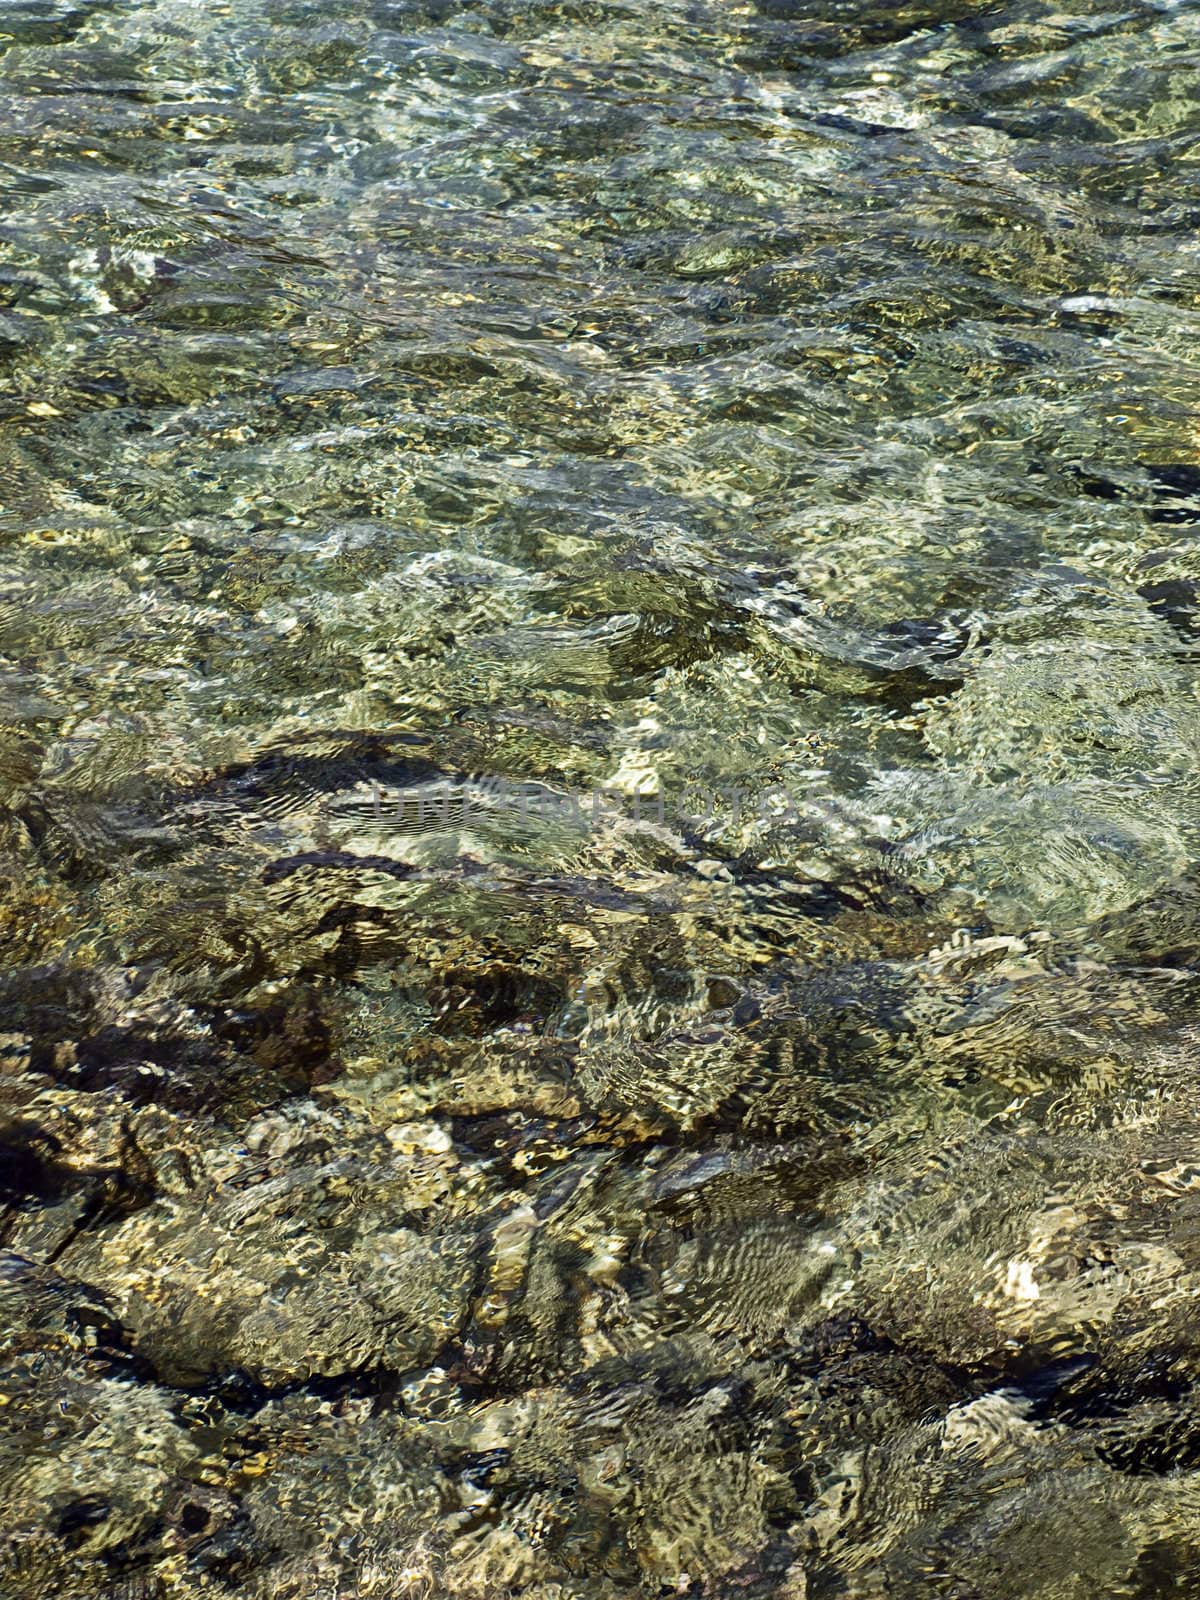 Abstract image showing a crystal clear shallow part of seawater